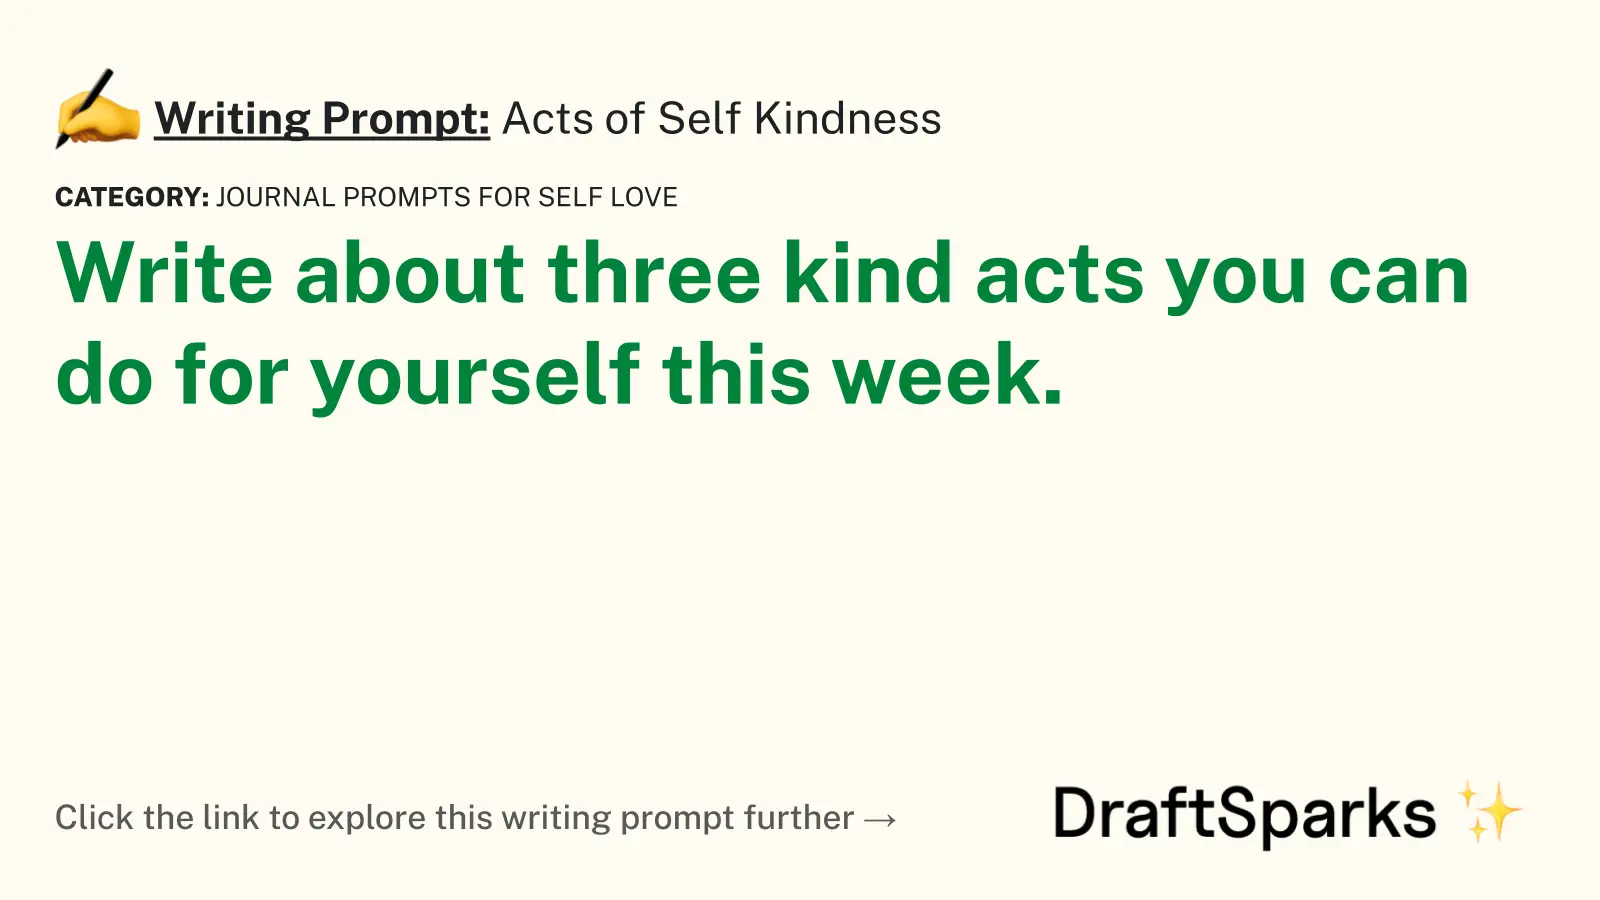 Acts of Self Kindness